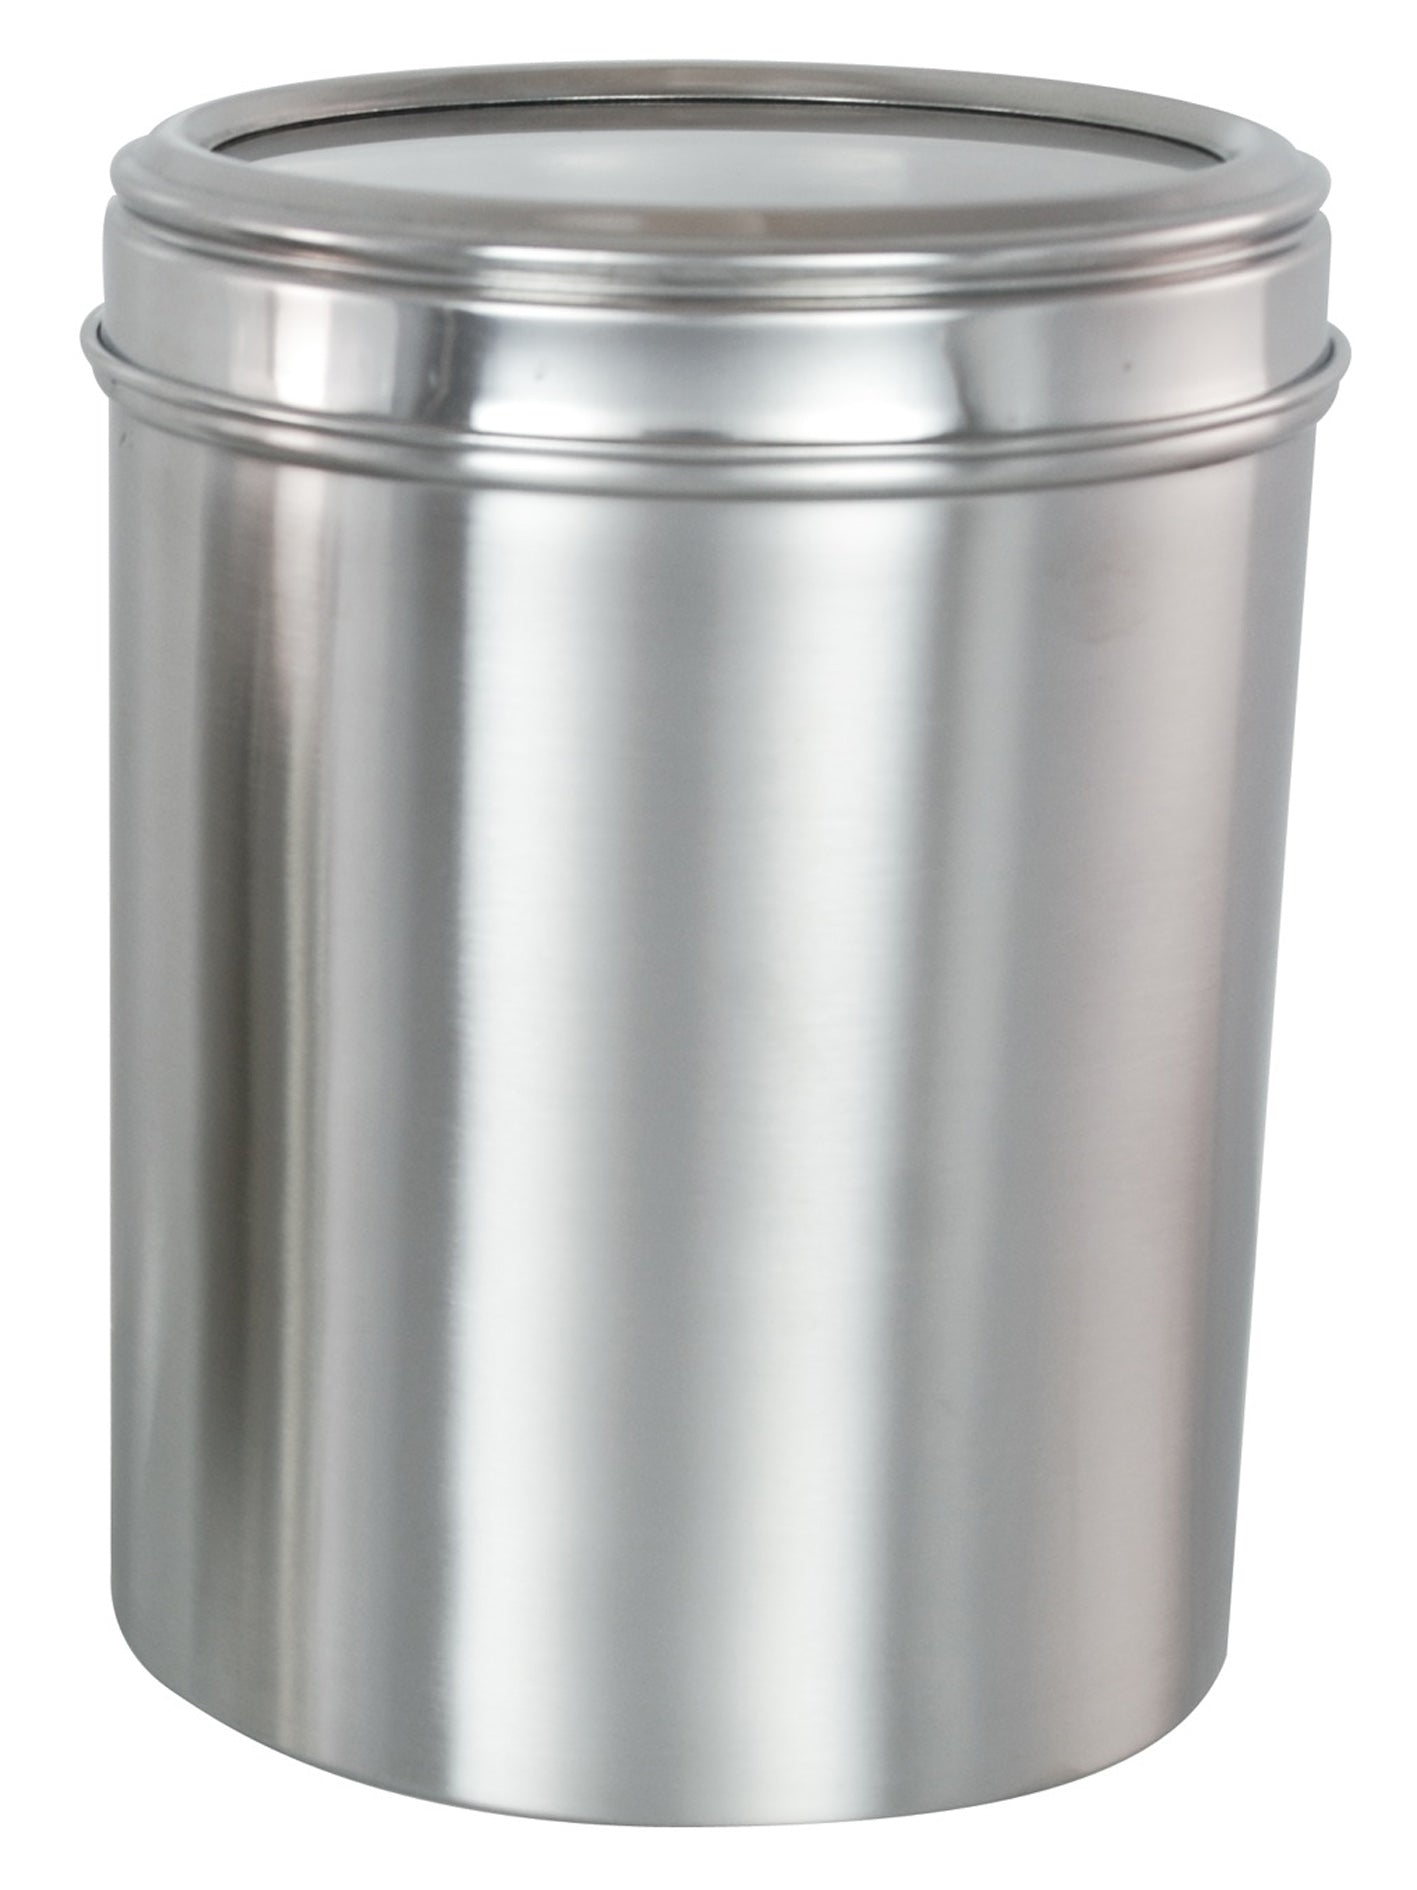 Buckingham 13 x 18 cm Stainless Steel Set Storage Canisters with Cut-Out Matte Finish Acrylic Lid, Silver